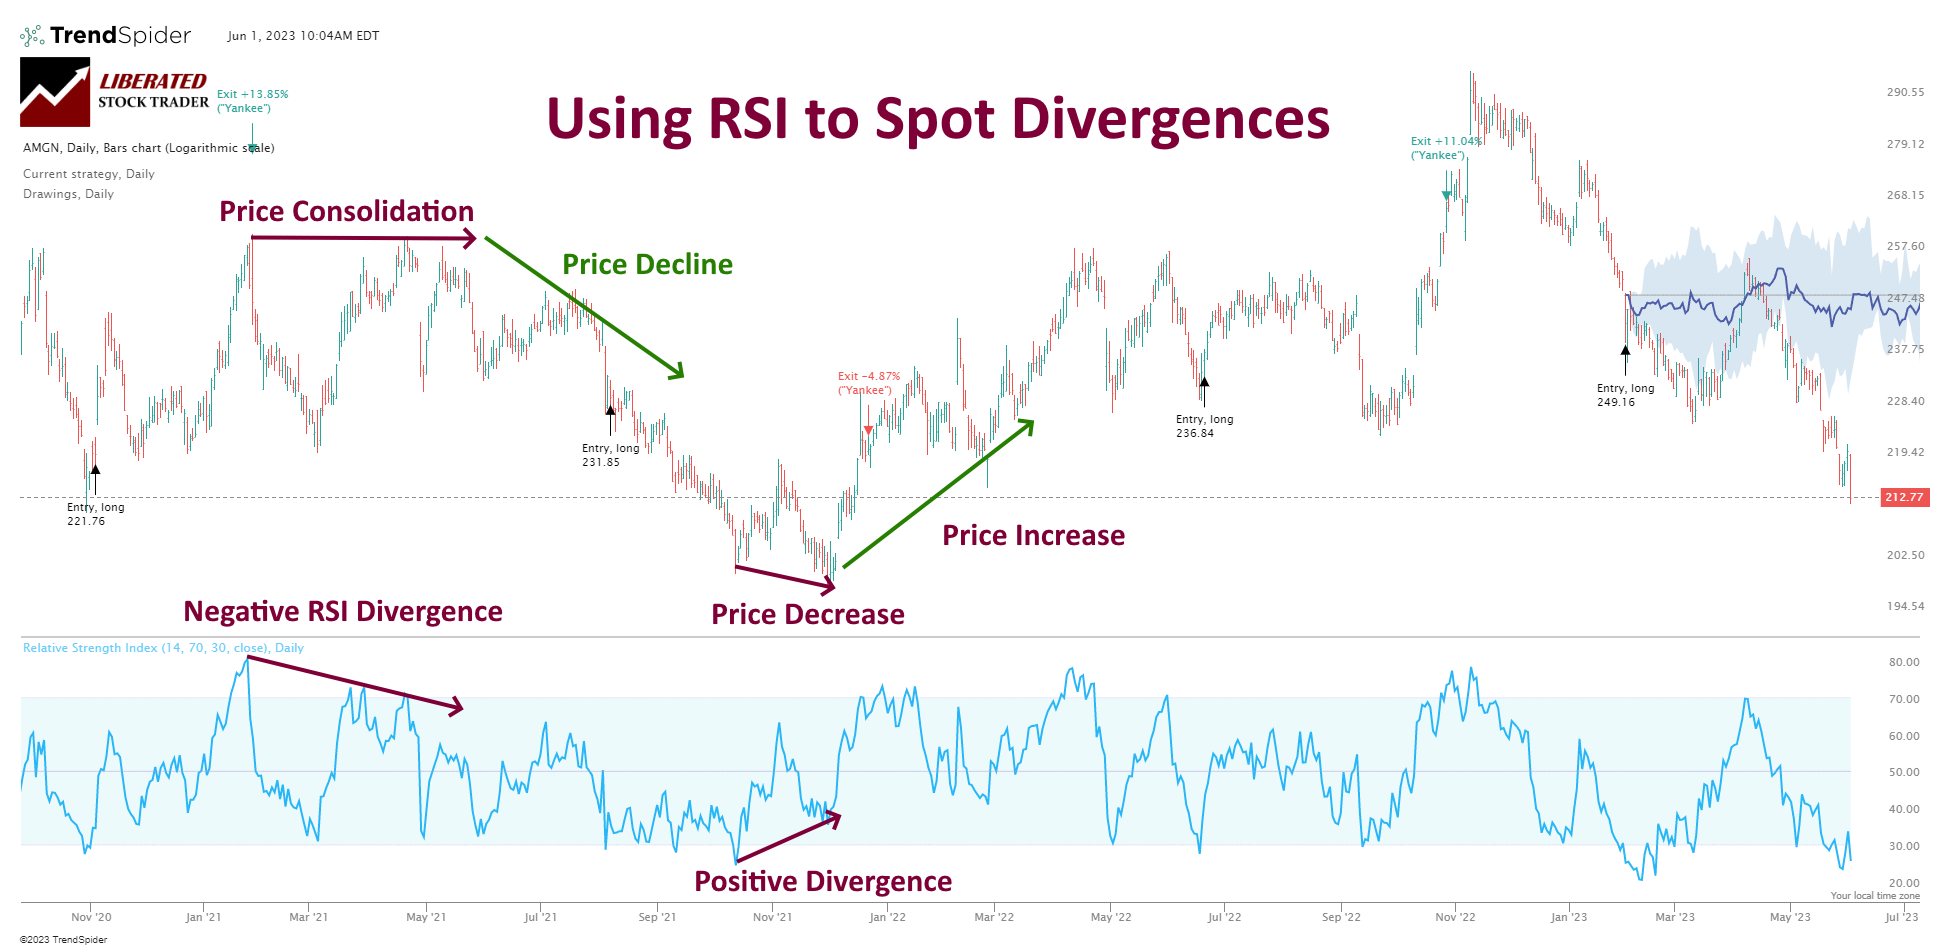 How to use RSI to spot price divergences.